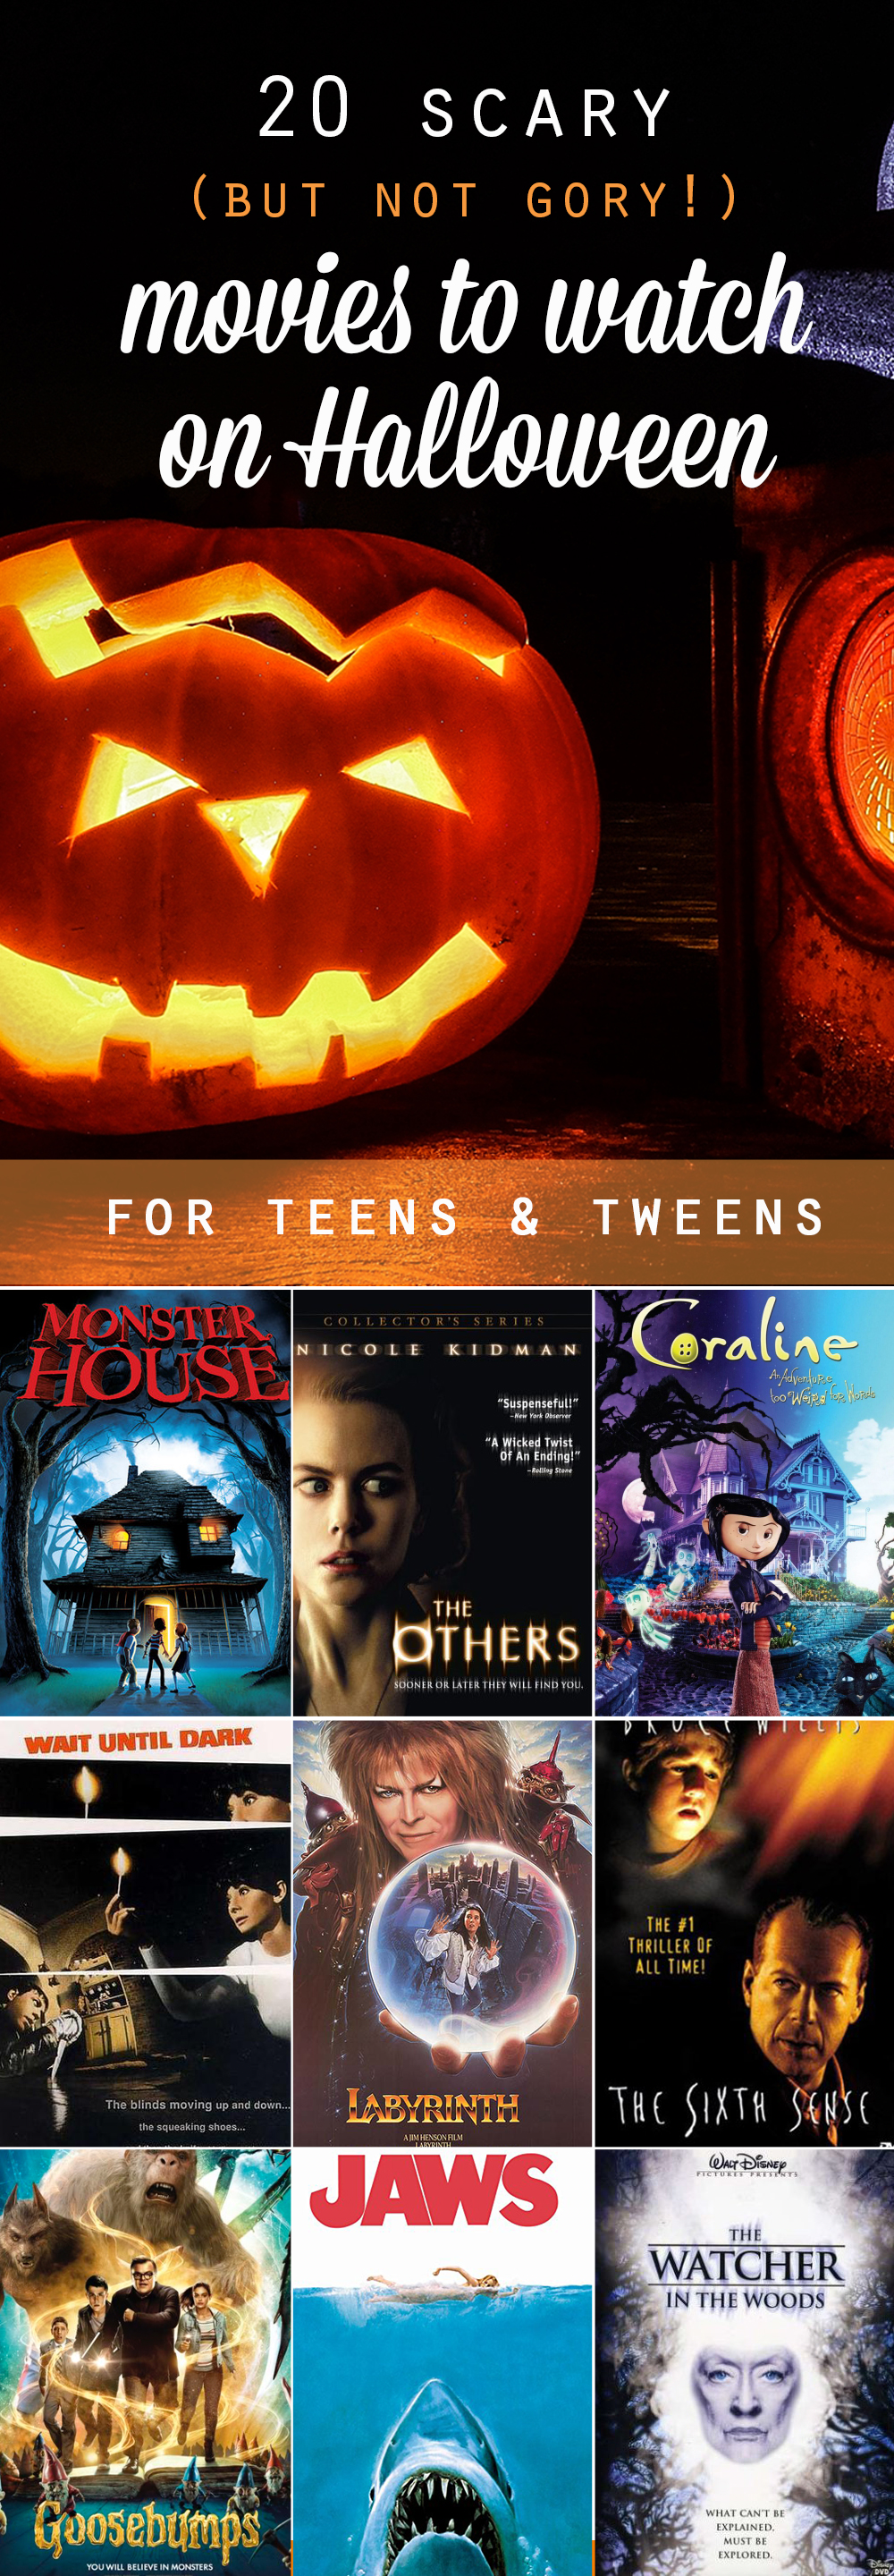 Halloween Movies For Teens At 108